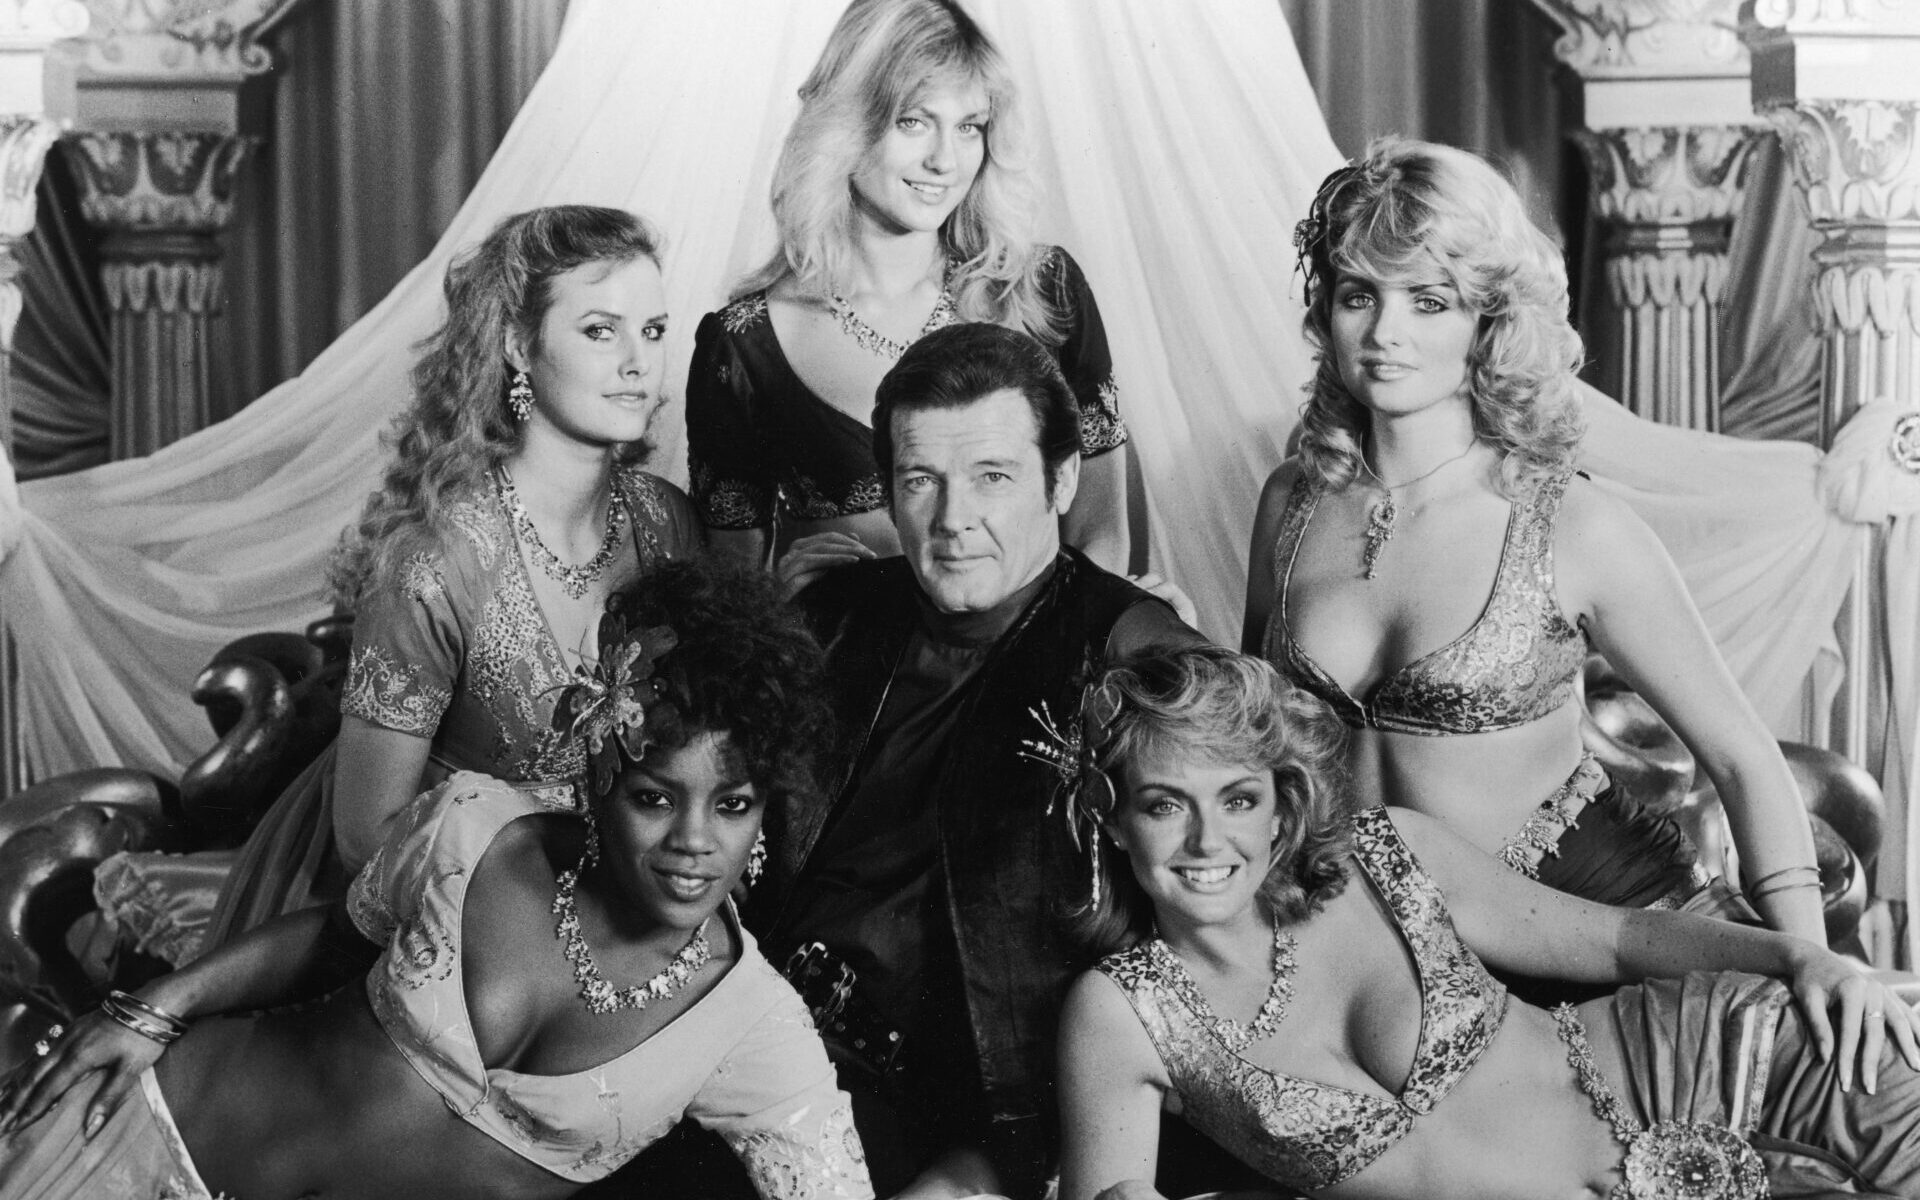 A promotional shot of British actor Roger Moore (as James Bond) surrounded by female palace guards in the film 'Octopussy', 1983. Clockwise from top, they are Carolyn Seaward, Carole Ashby, Tina Robinson, Gillian De Terville and Mary Stavin. (Photo by United Artists/Archive Photos/Getty Images)